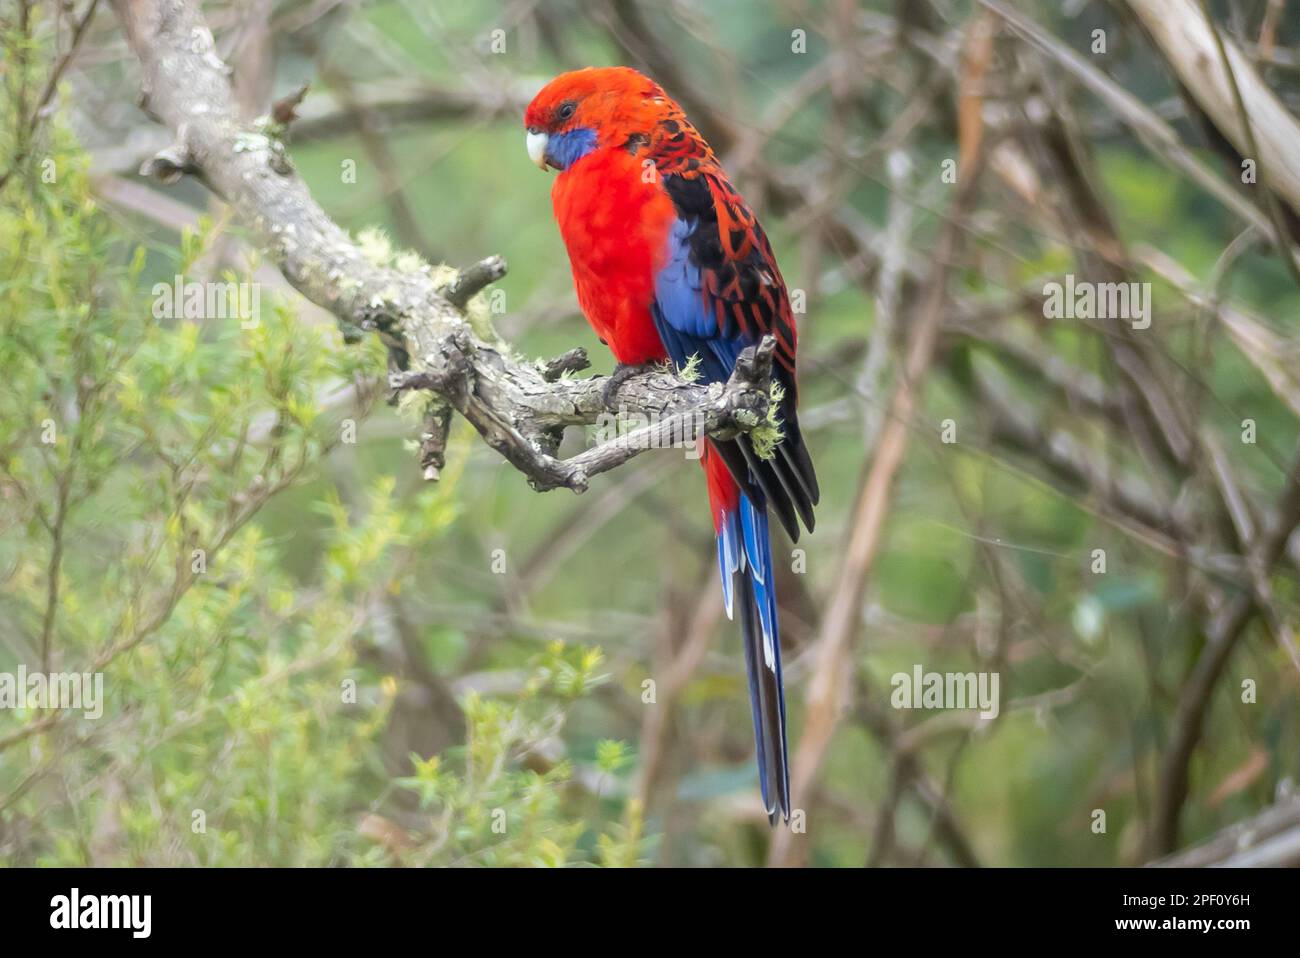 Red and blue parakeet Stock Photo